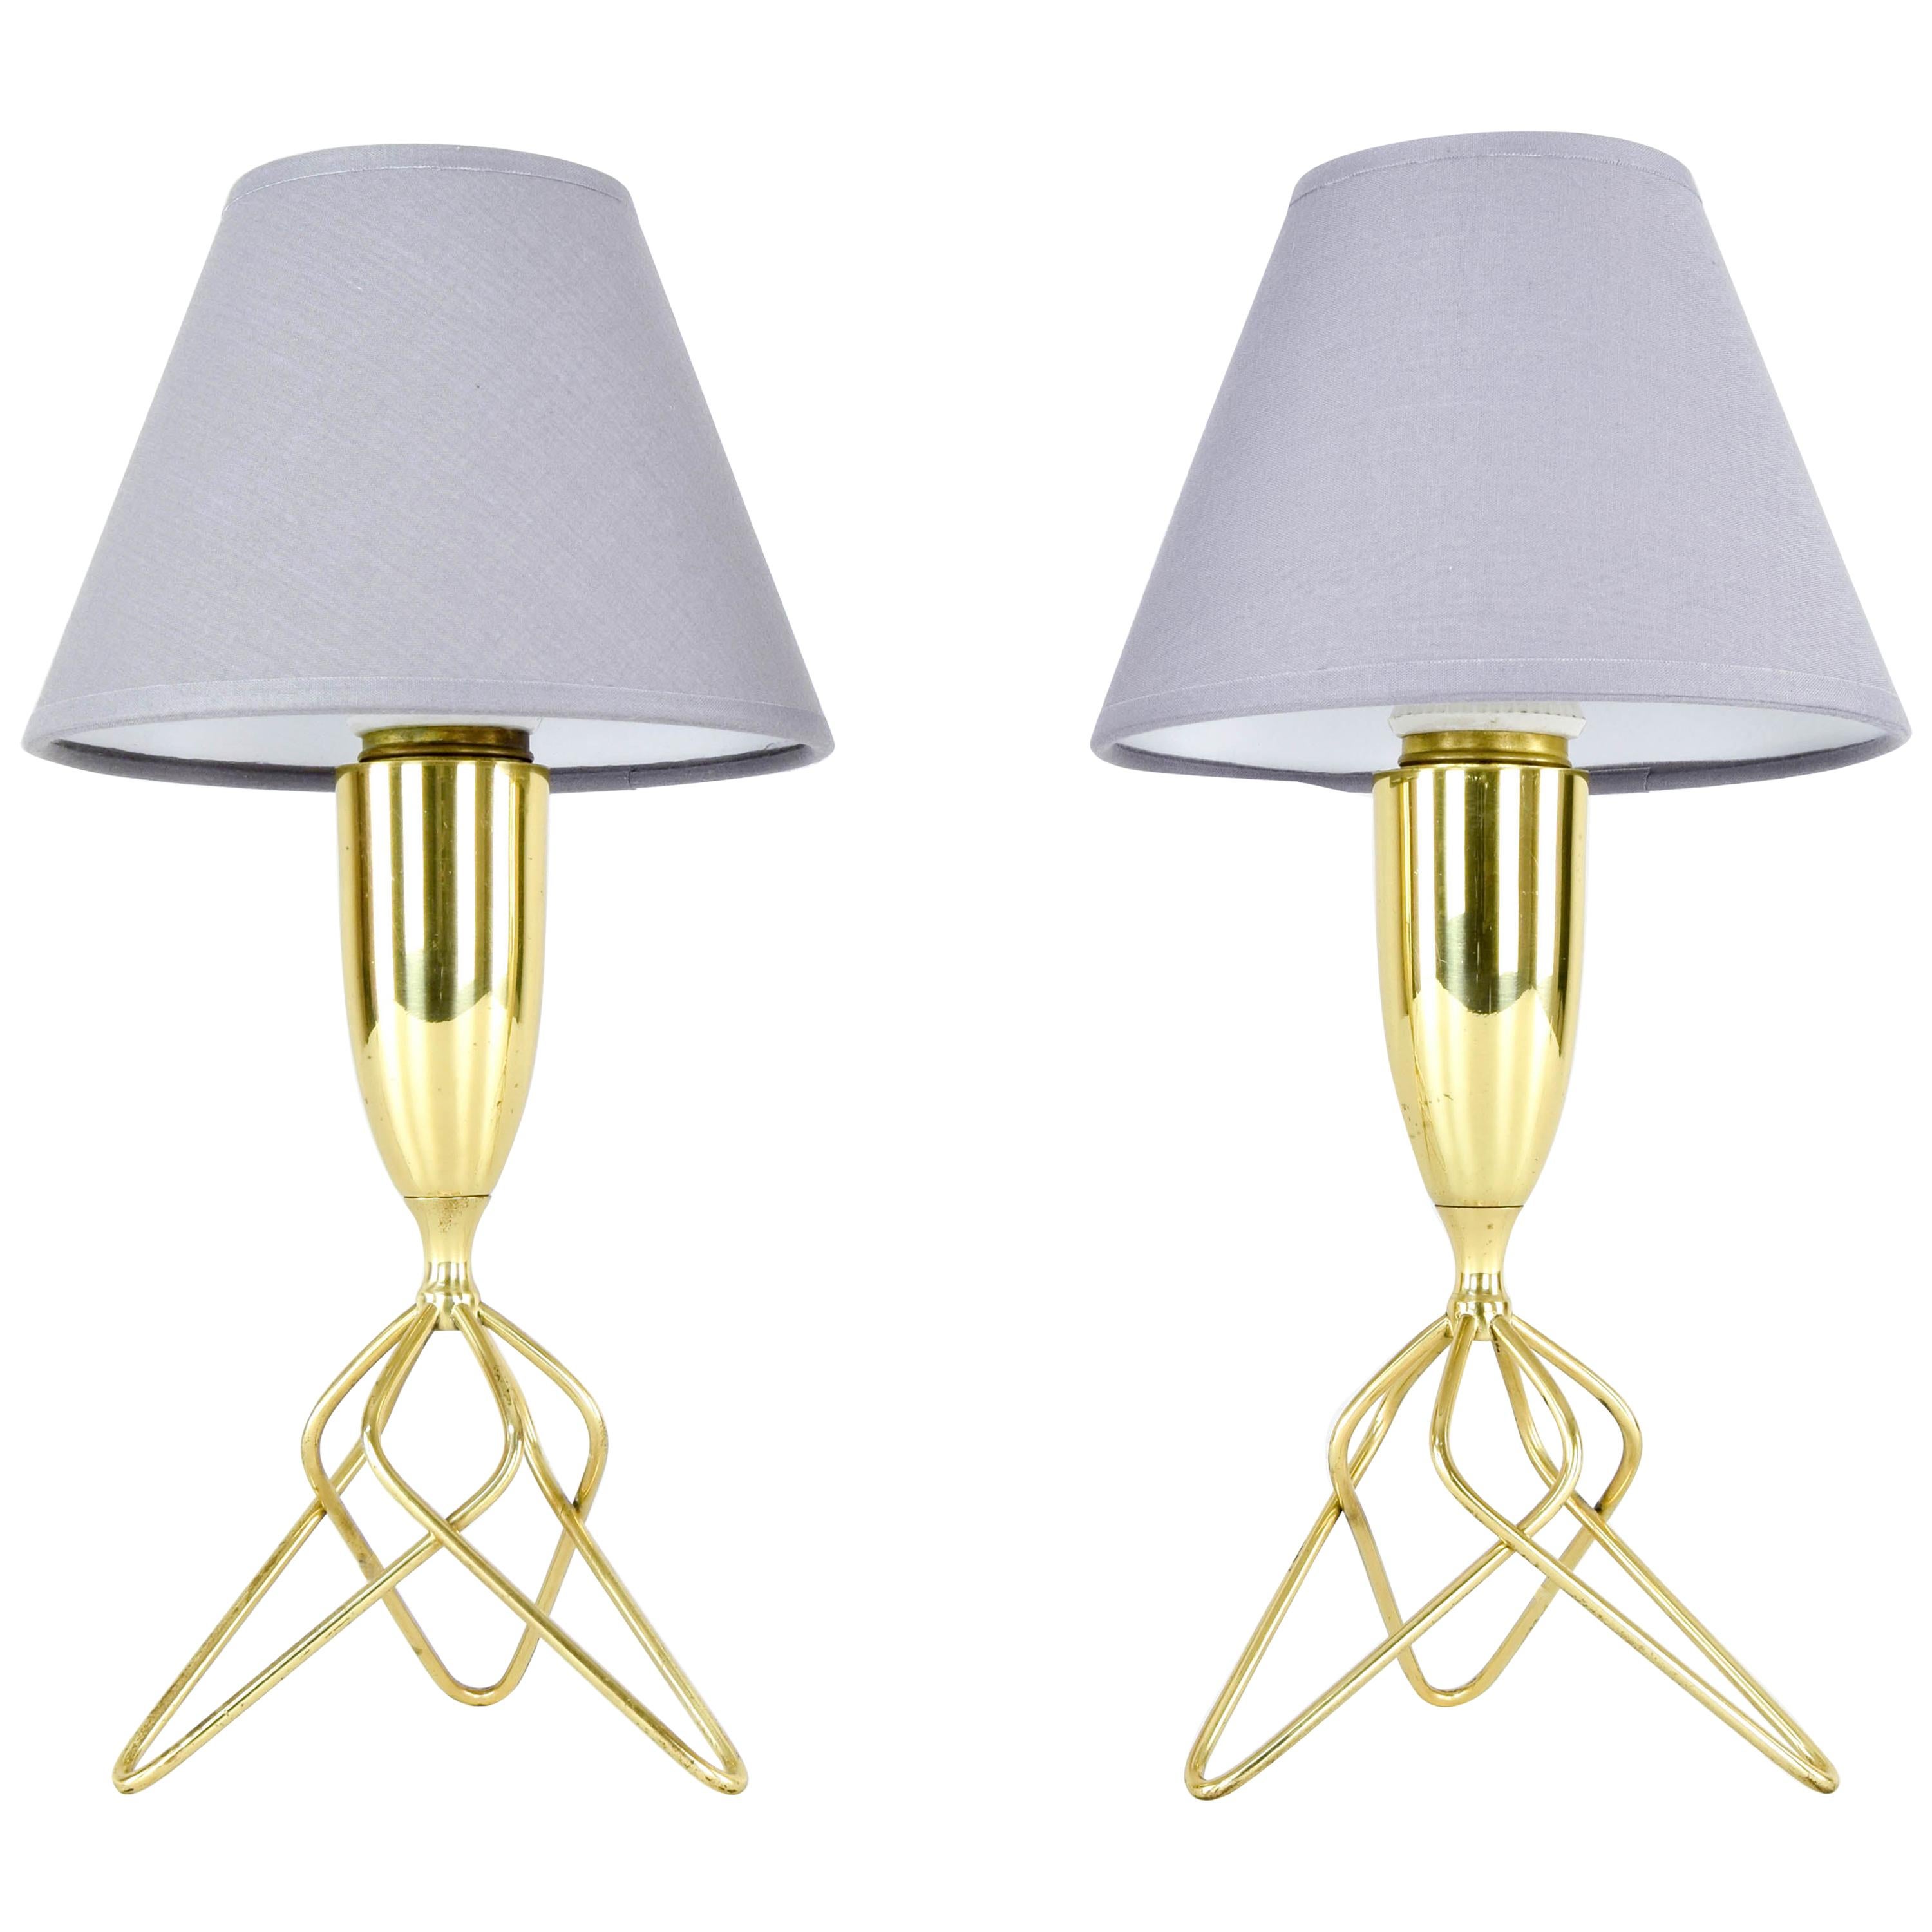 Pair of Scandinavian Brass Tripod Table Lamps with Gray Lampshades, Denmark 60s For Sale